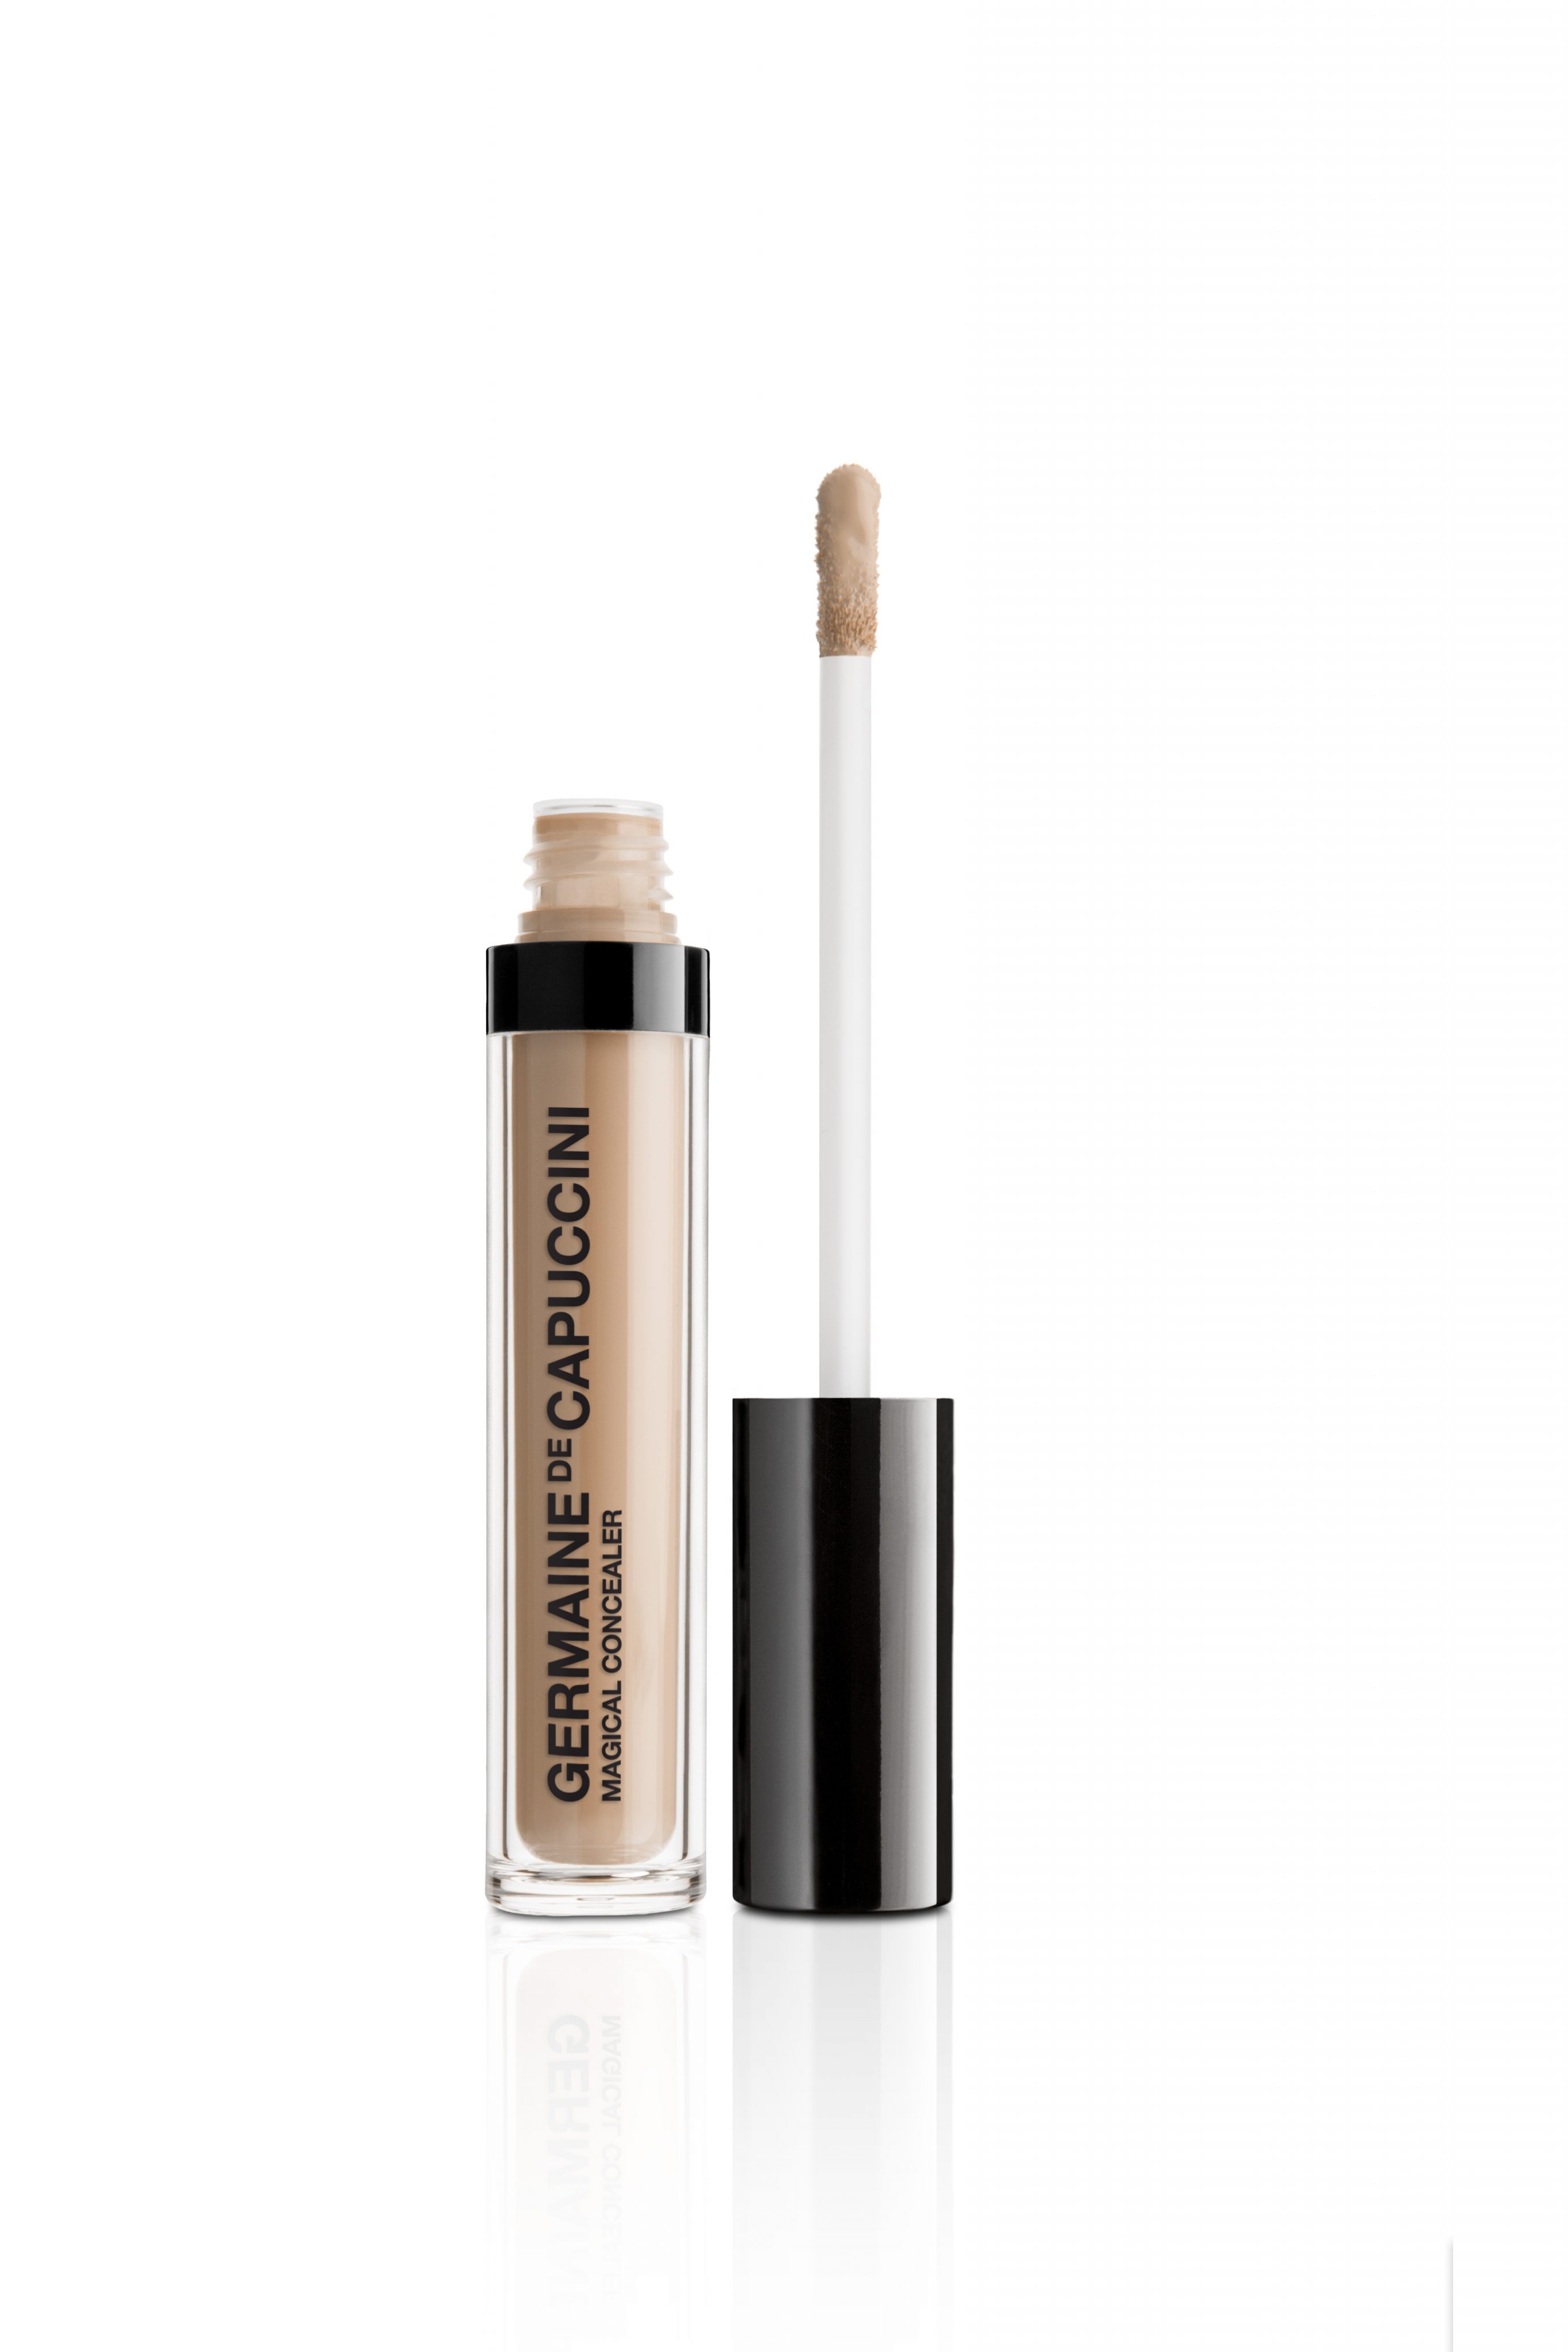 All Nele Care Magical Concealer 435 Ivory